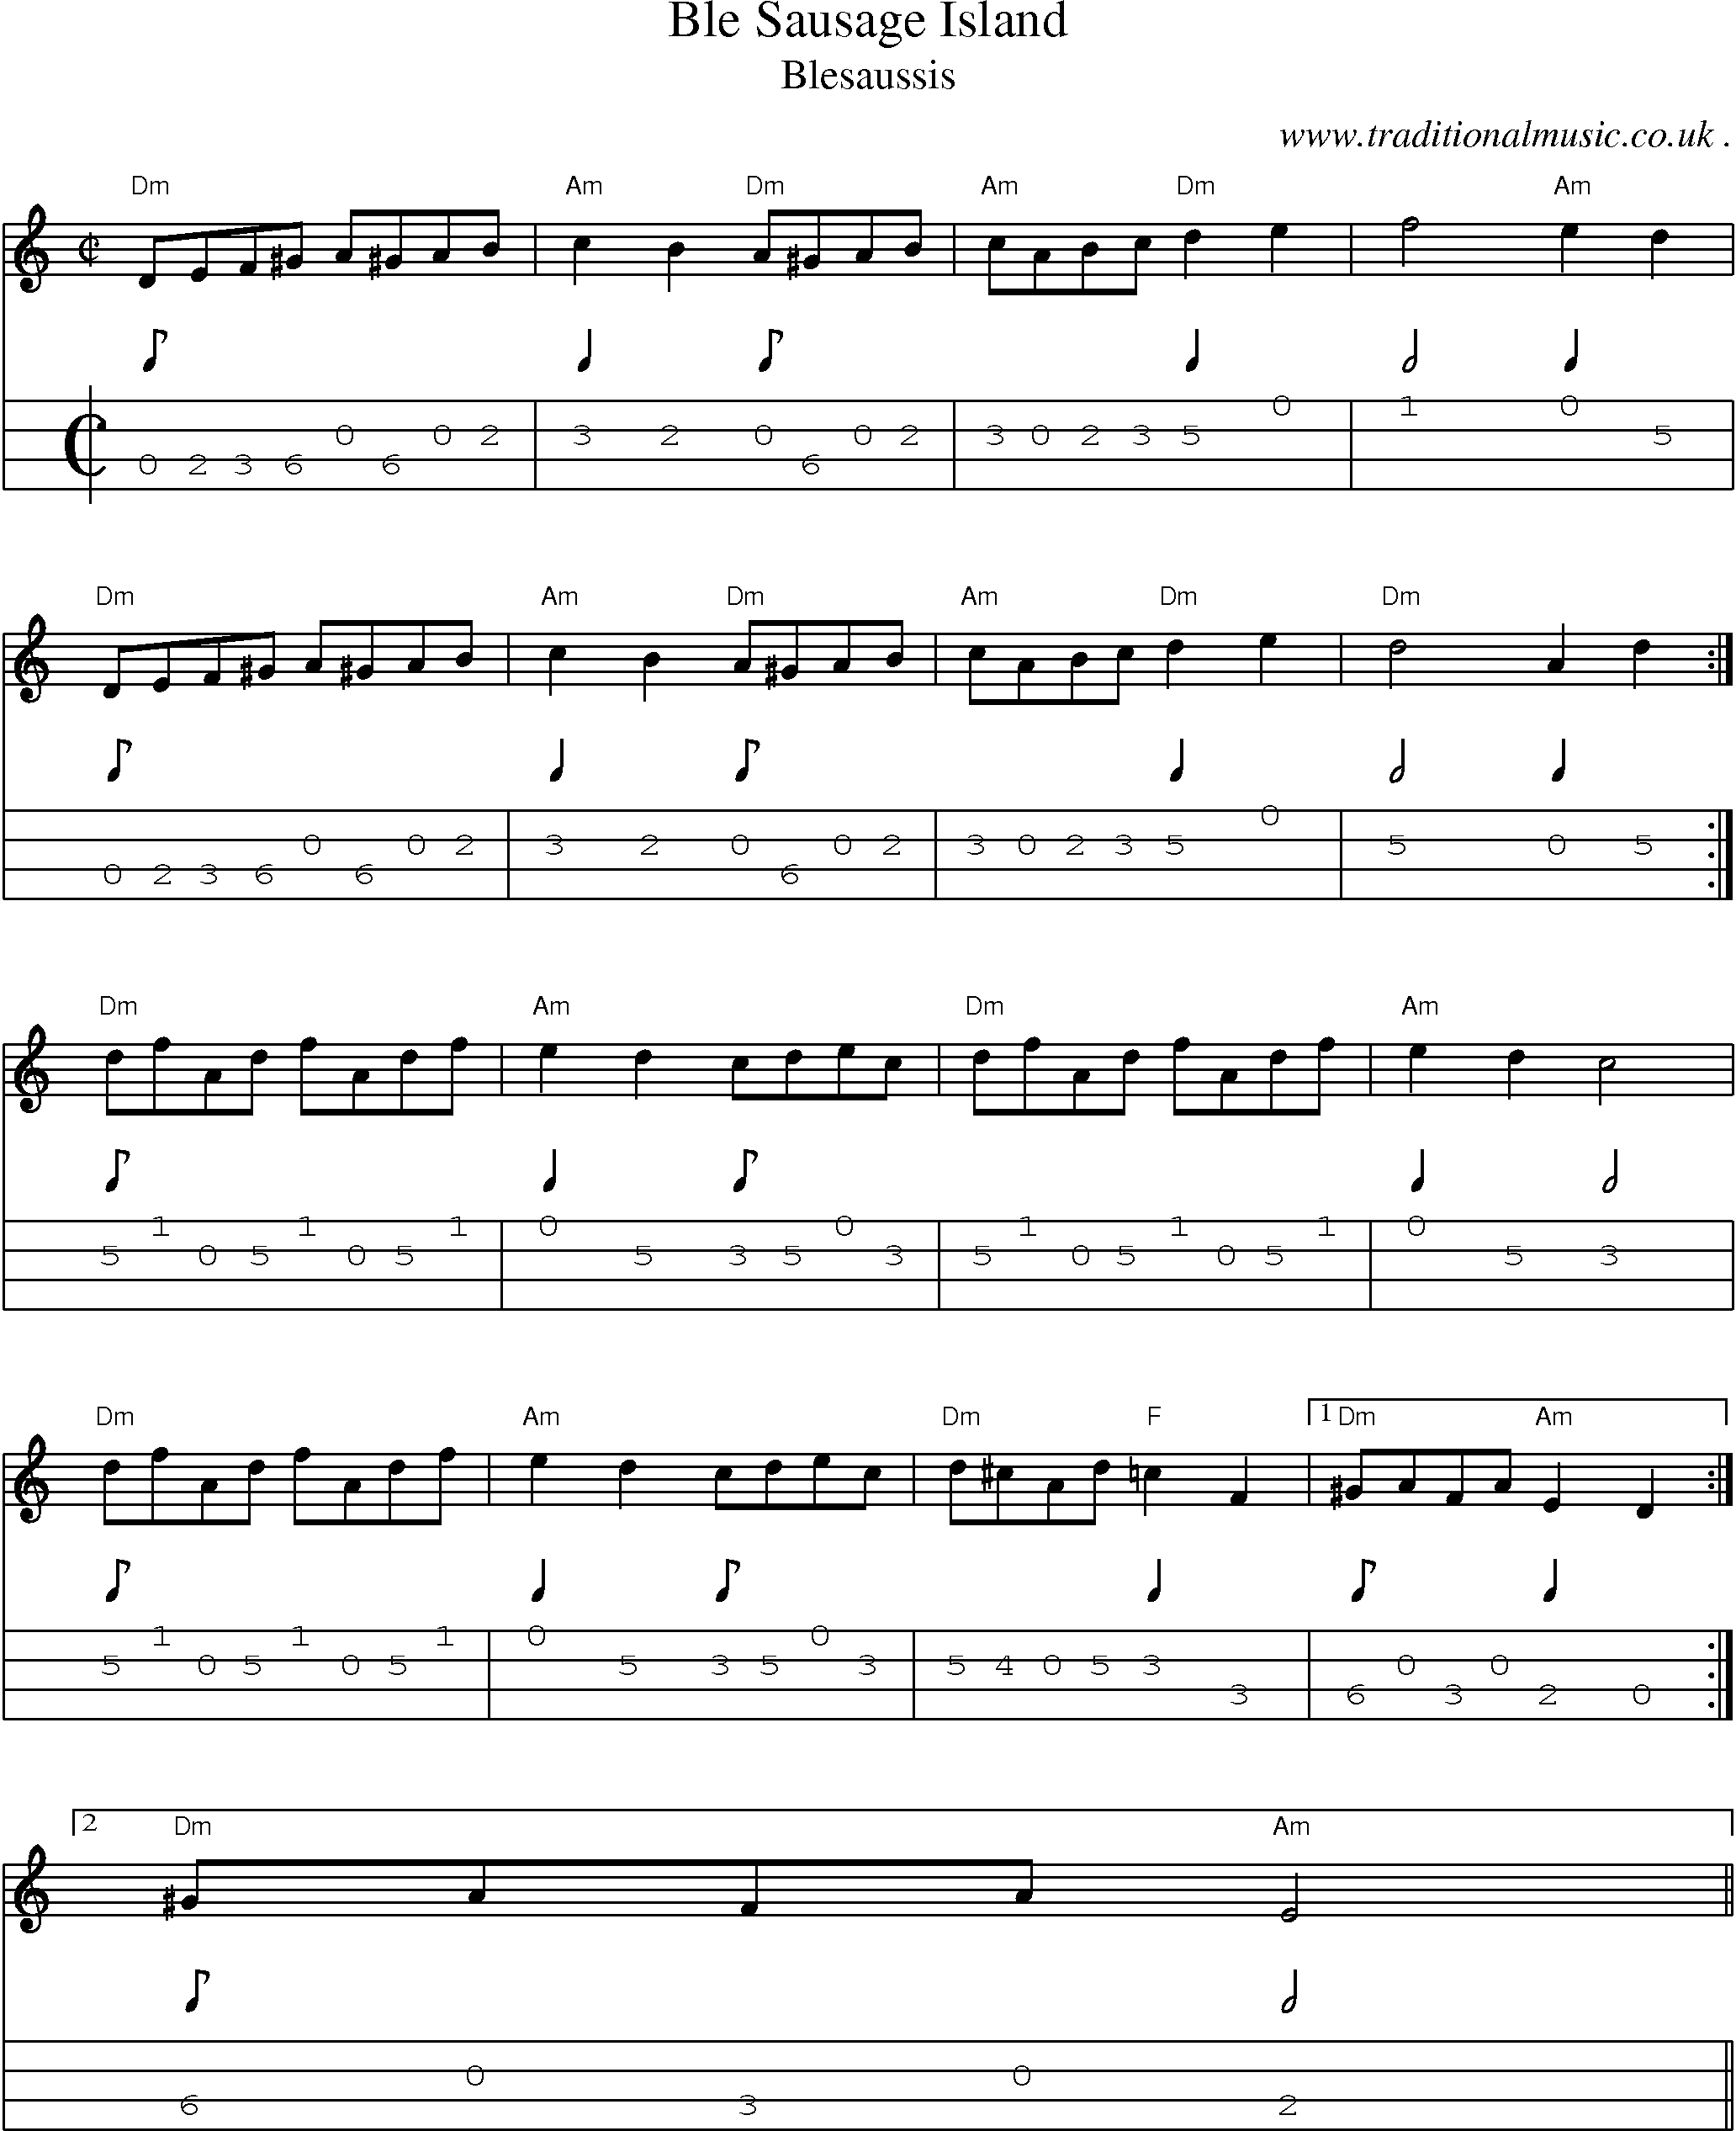 Sheet-Music and Mandolin Tabs for Ble Sausage Island